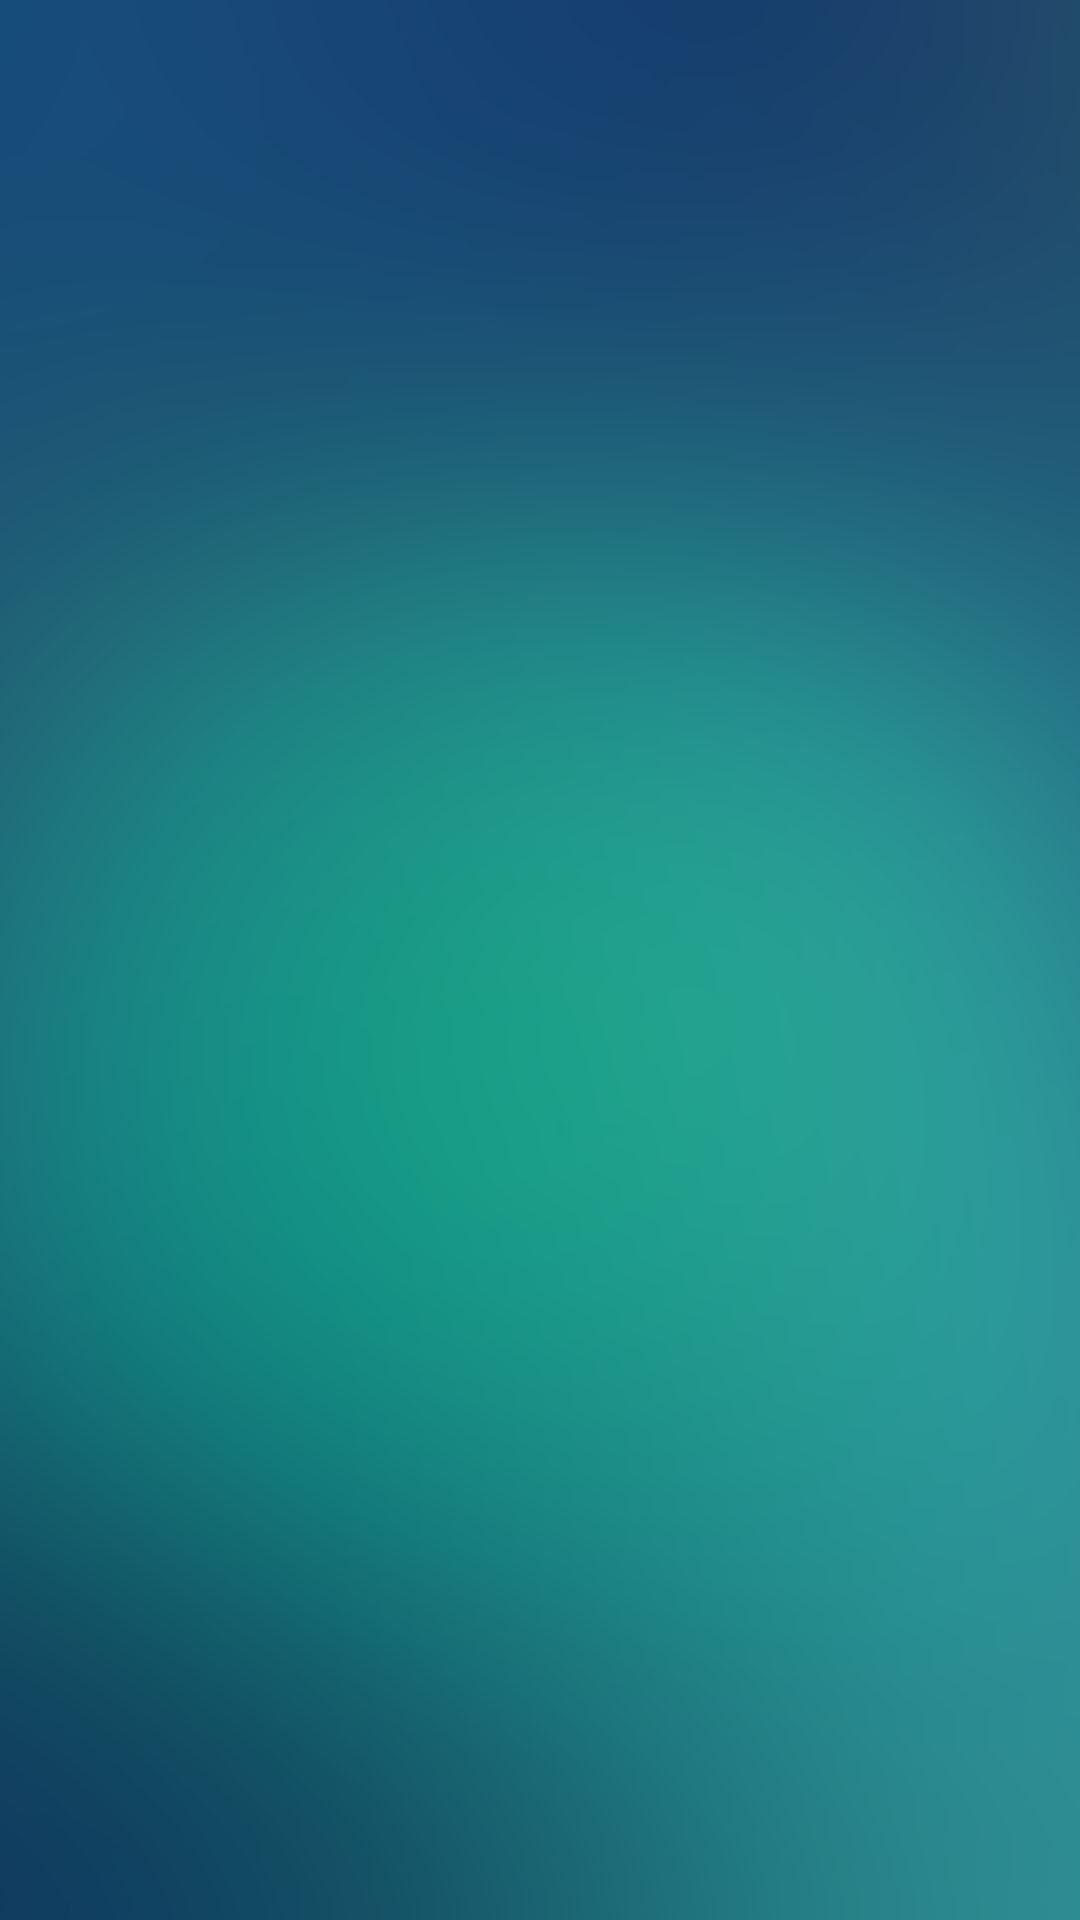 Blue Green Circle Gradient Android Wallpaper